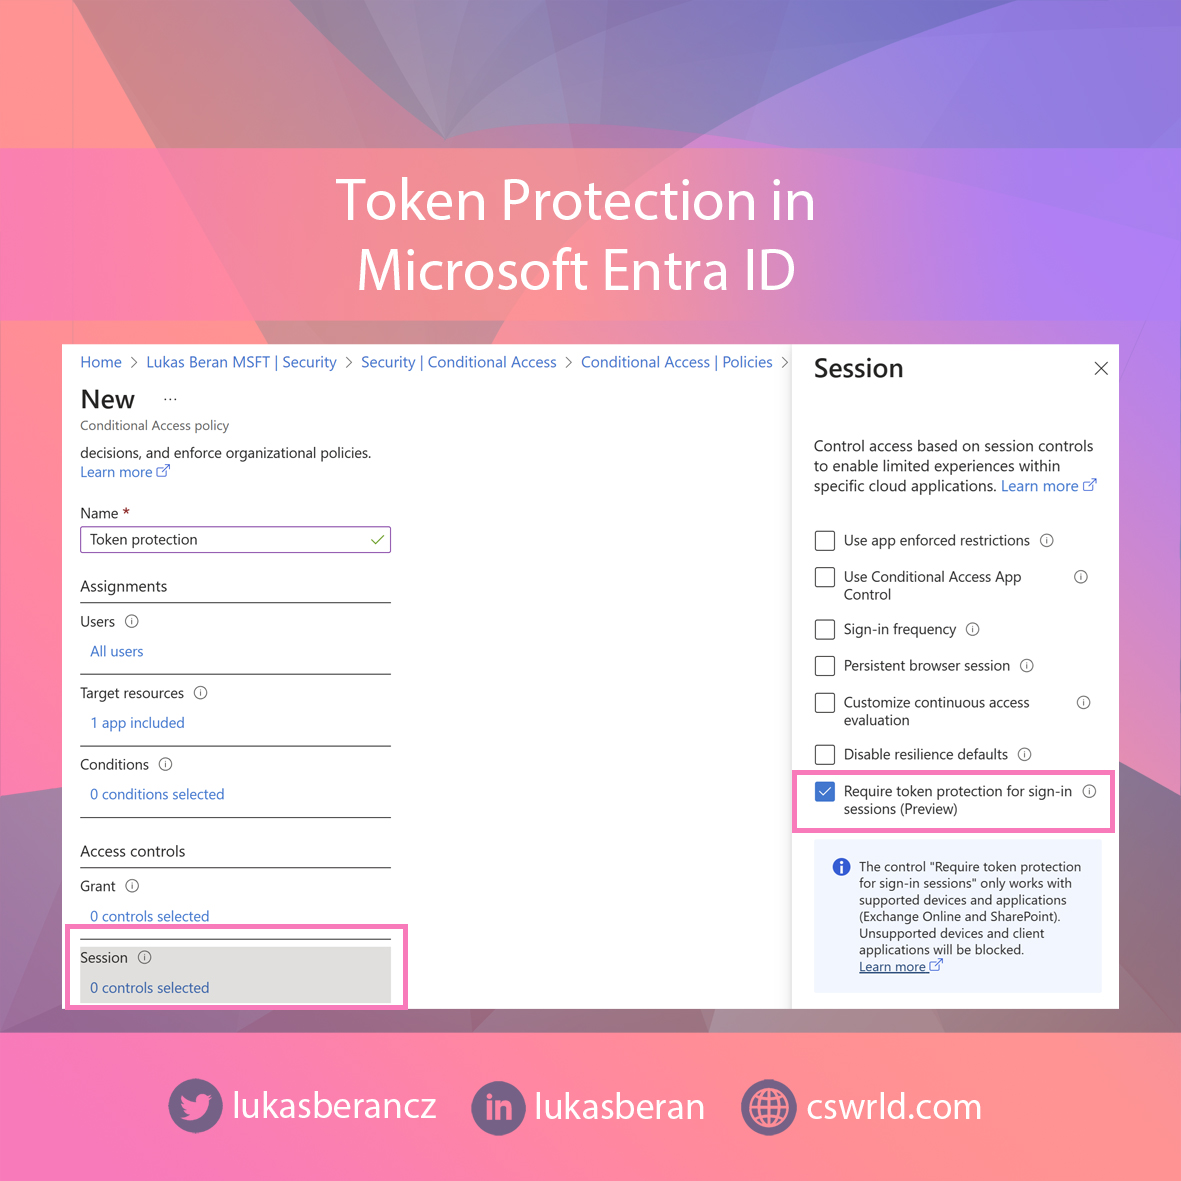 Microsoft Entra ID Token Protection is a security feature within Microsoft Entra's Conditional Access that aims to mitigate token theft by ensuring that a token can only be used from the device it was issued to. This is achieved through a process called token binding, which…